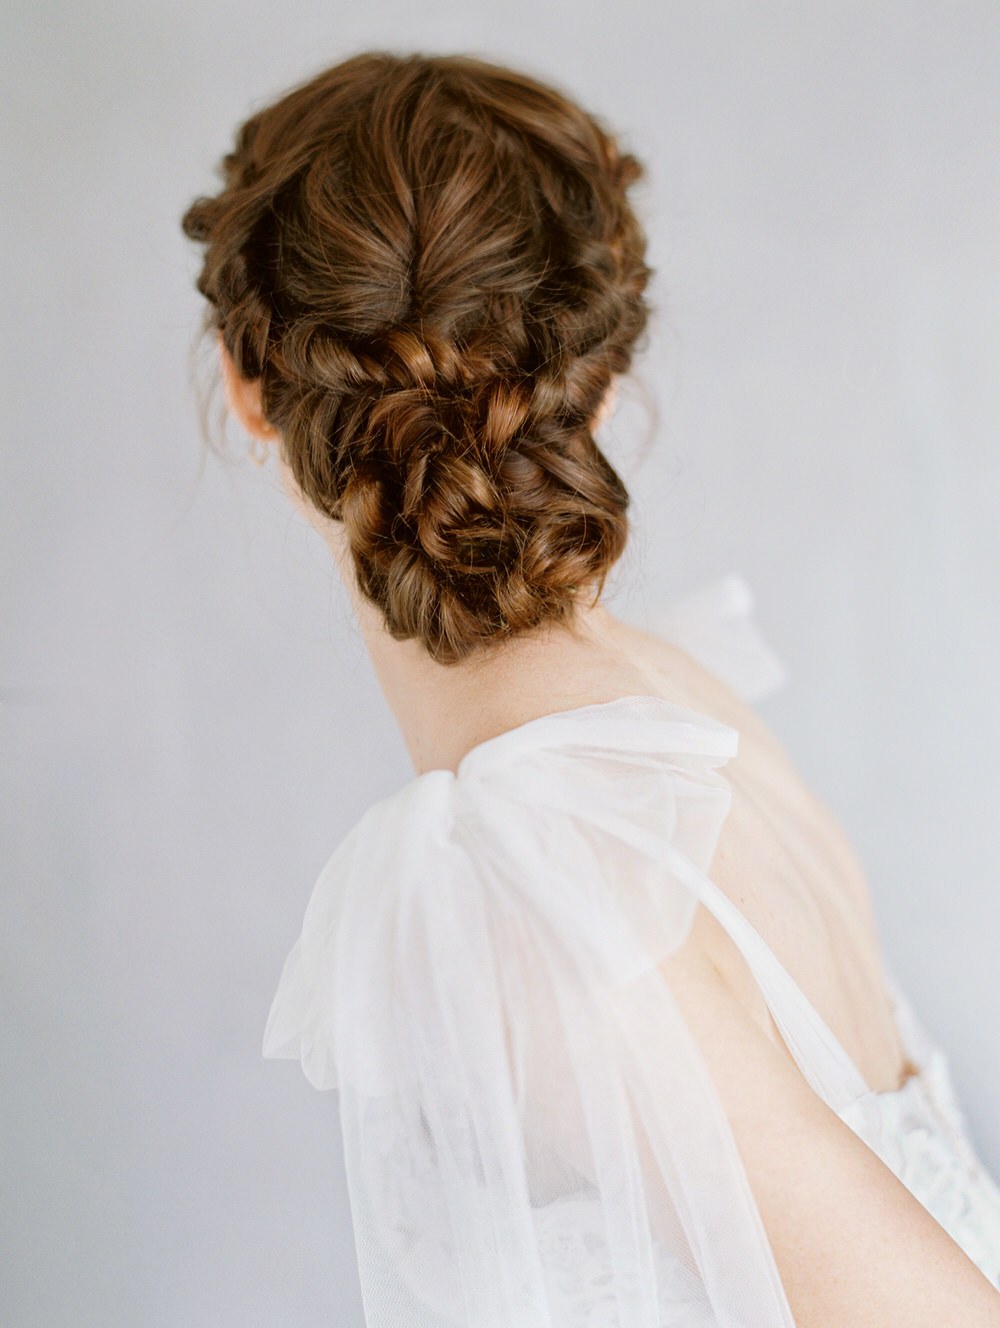 You Need To Check Out These Gorgeous Bridal Hairstyles!